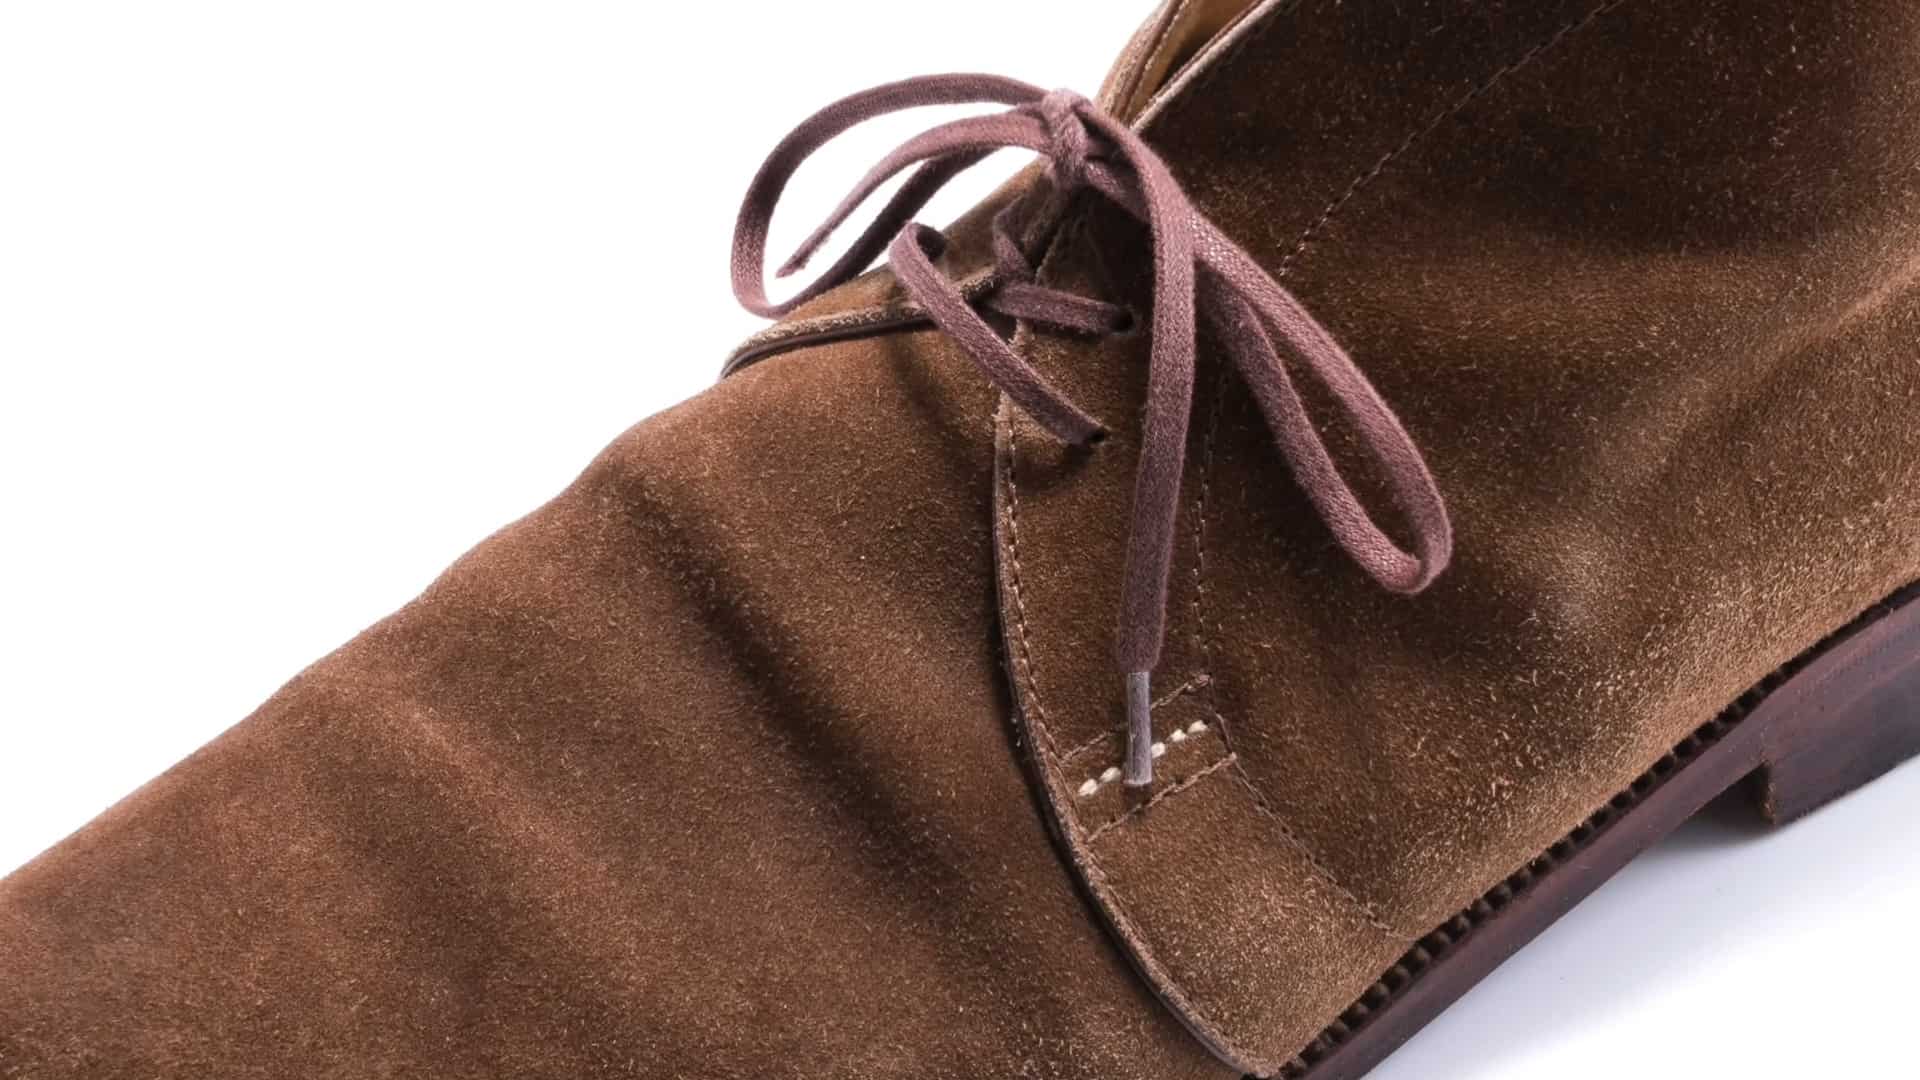 Photo of Suede calfskin leather typical of chukka boots